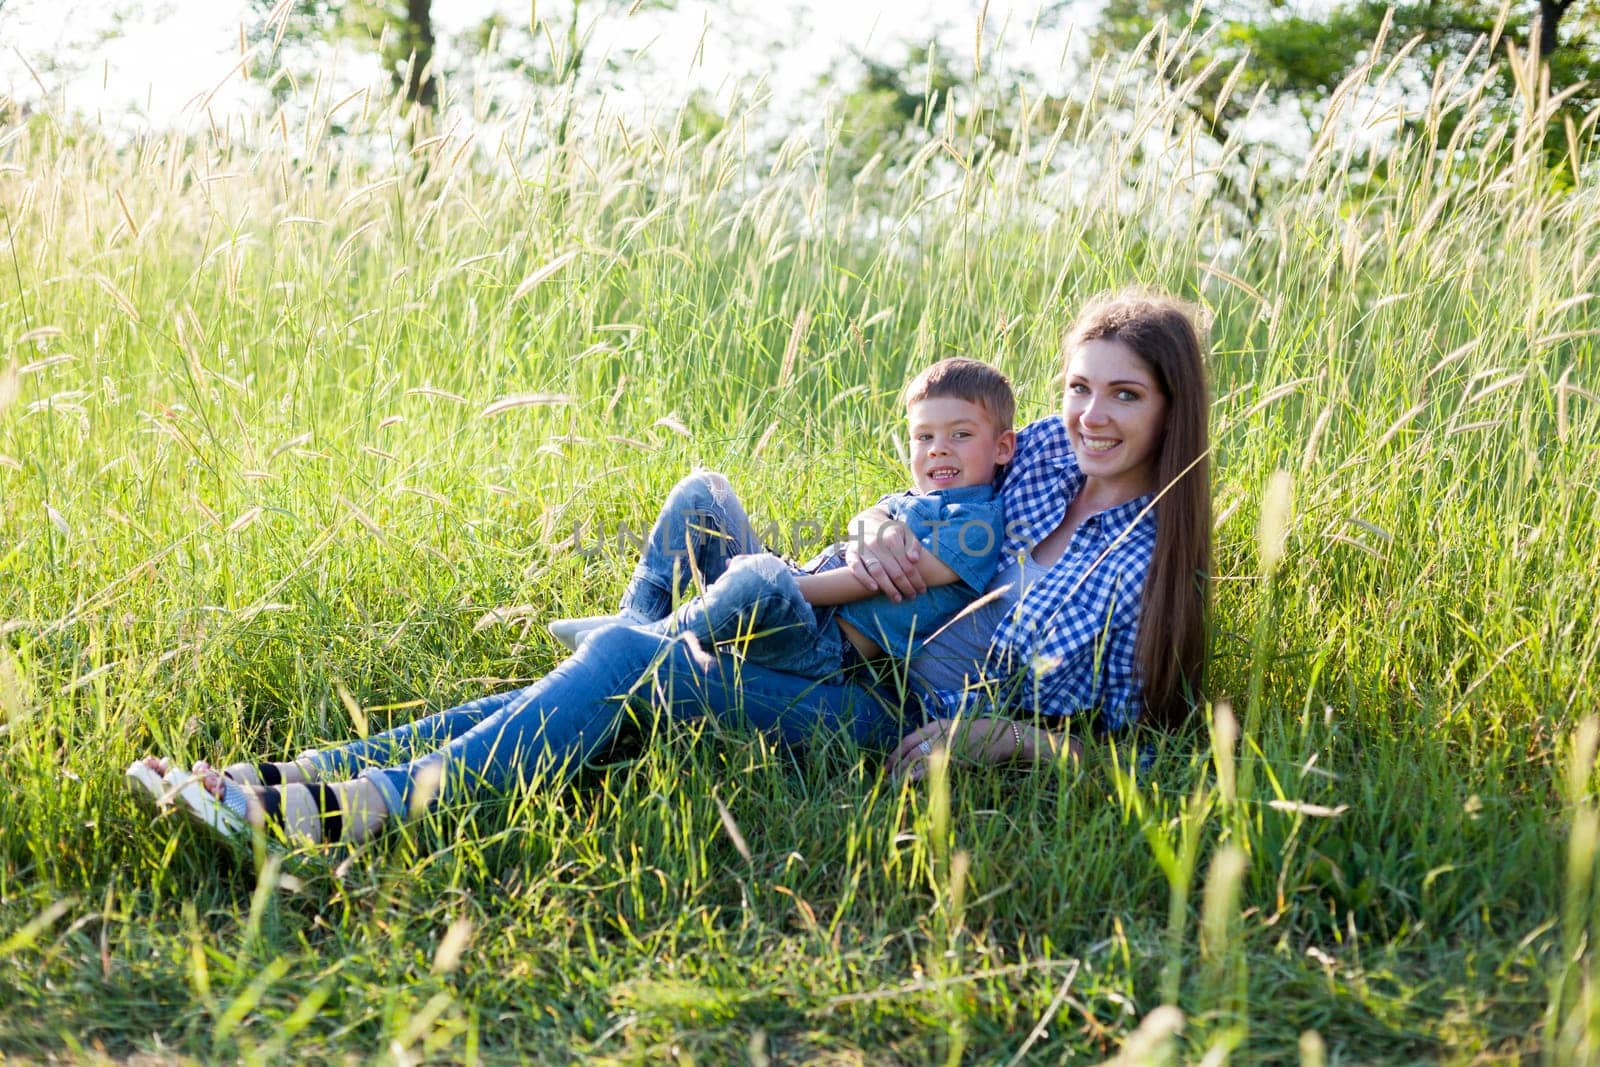 Portrait of a woman with her son on a walk in nature